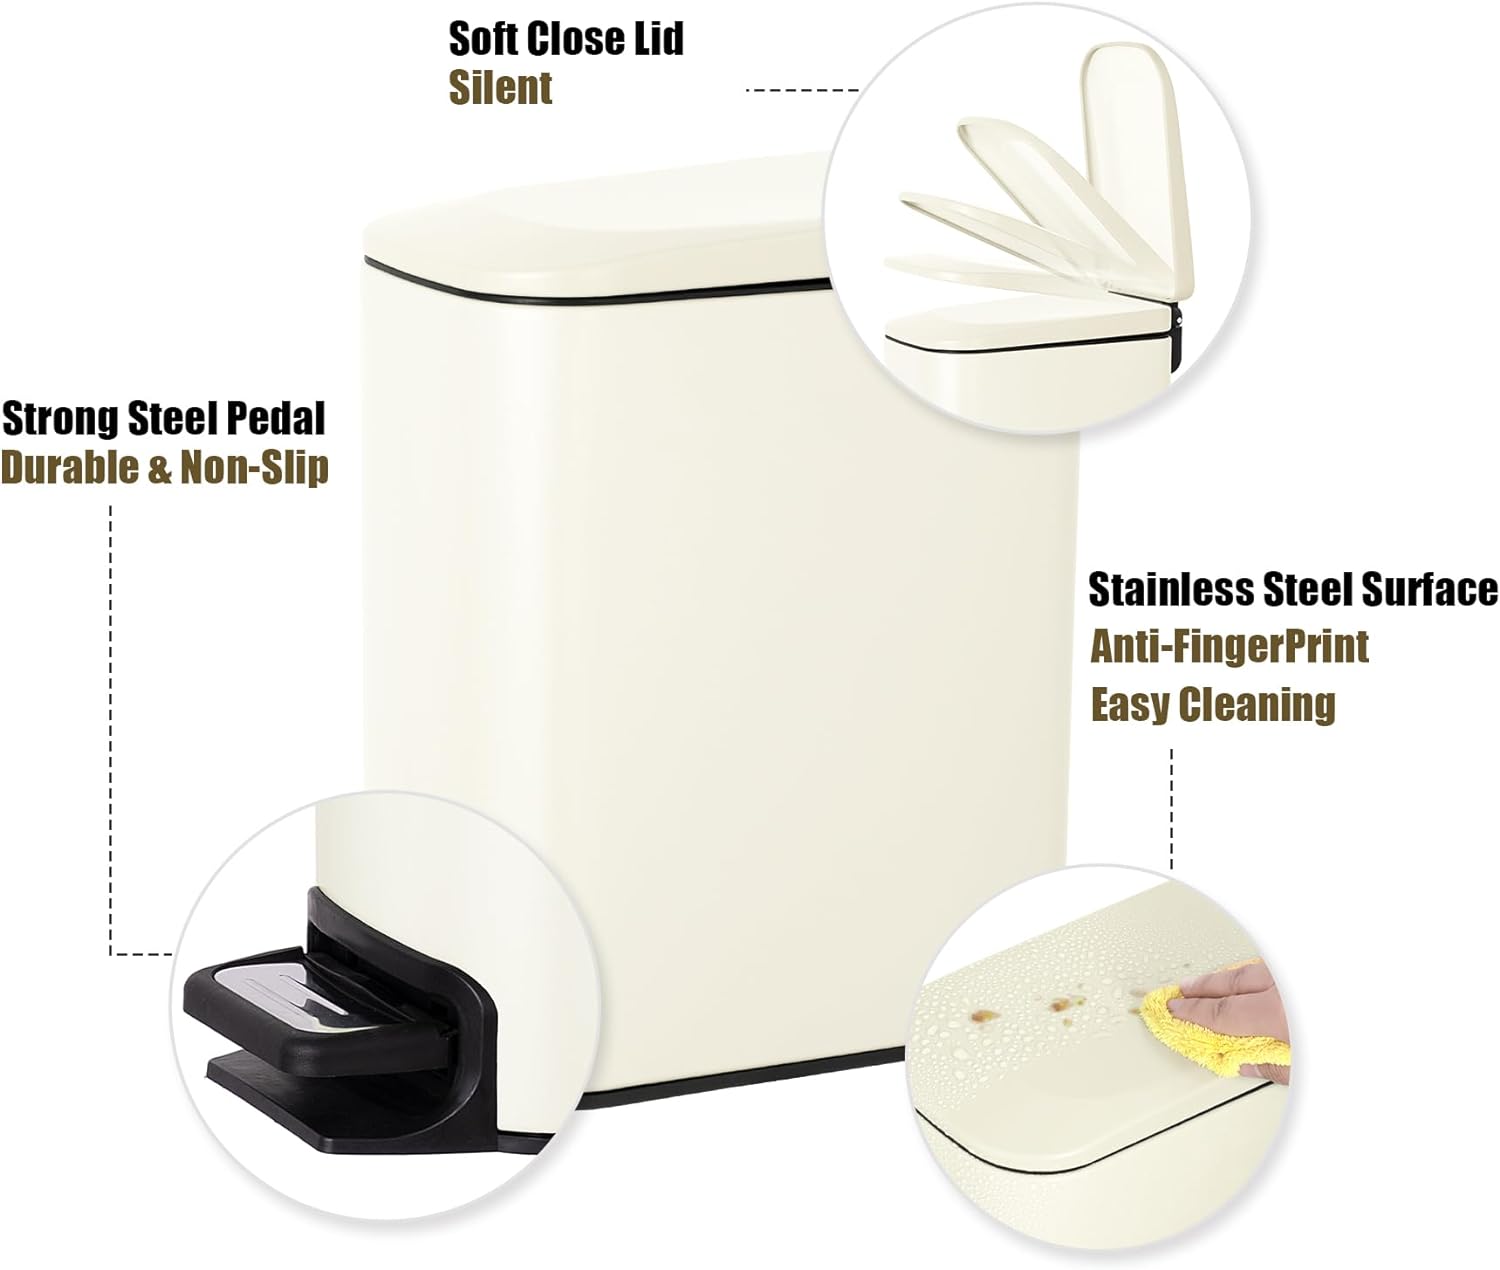 https://bigbigmart.com/wp-content/uploads/2023/10/Cesun-Small-Bathroom-Trash-Can-with-Lid-Soft-Close-Step-Pedal-6-Liter-1.6-Gallon-Stainless-Steel-Garbage-Can-with-Removable-Inner-Bucket-Anti-Fingerprint-Finish-Creamy-White2.jpg